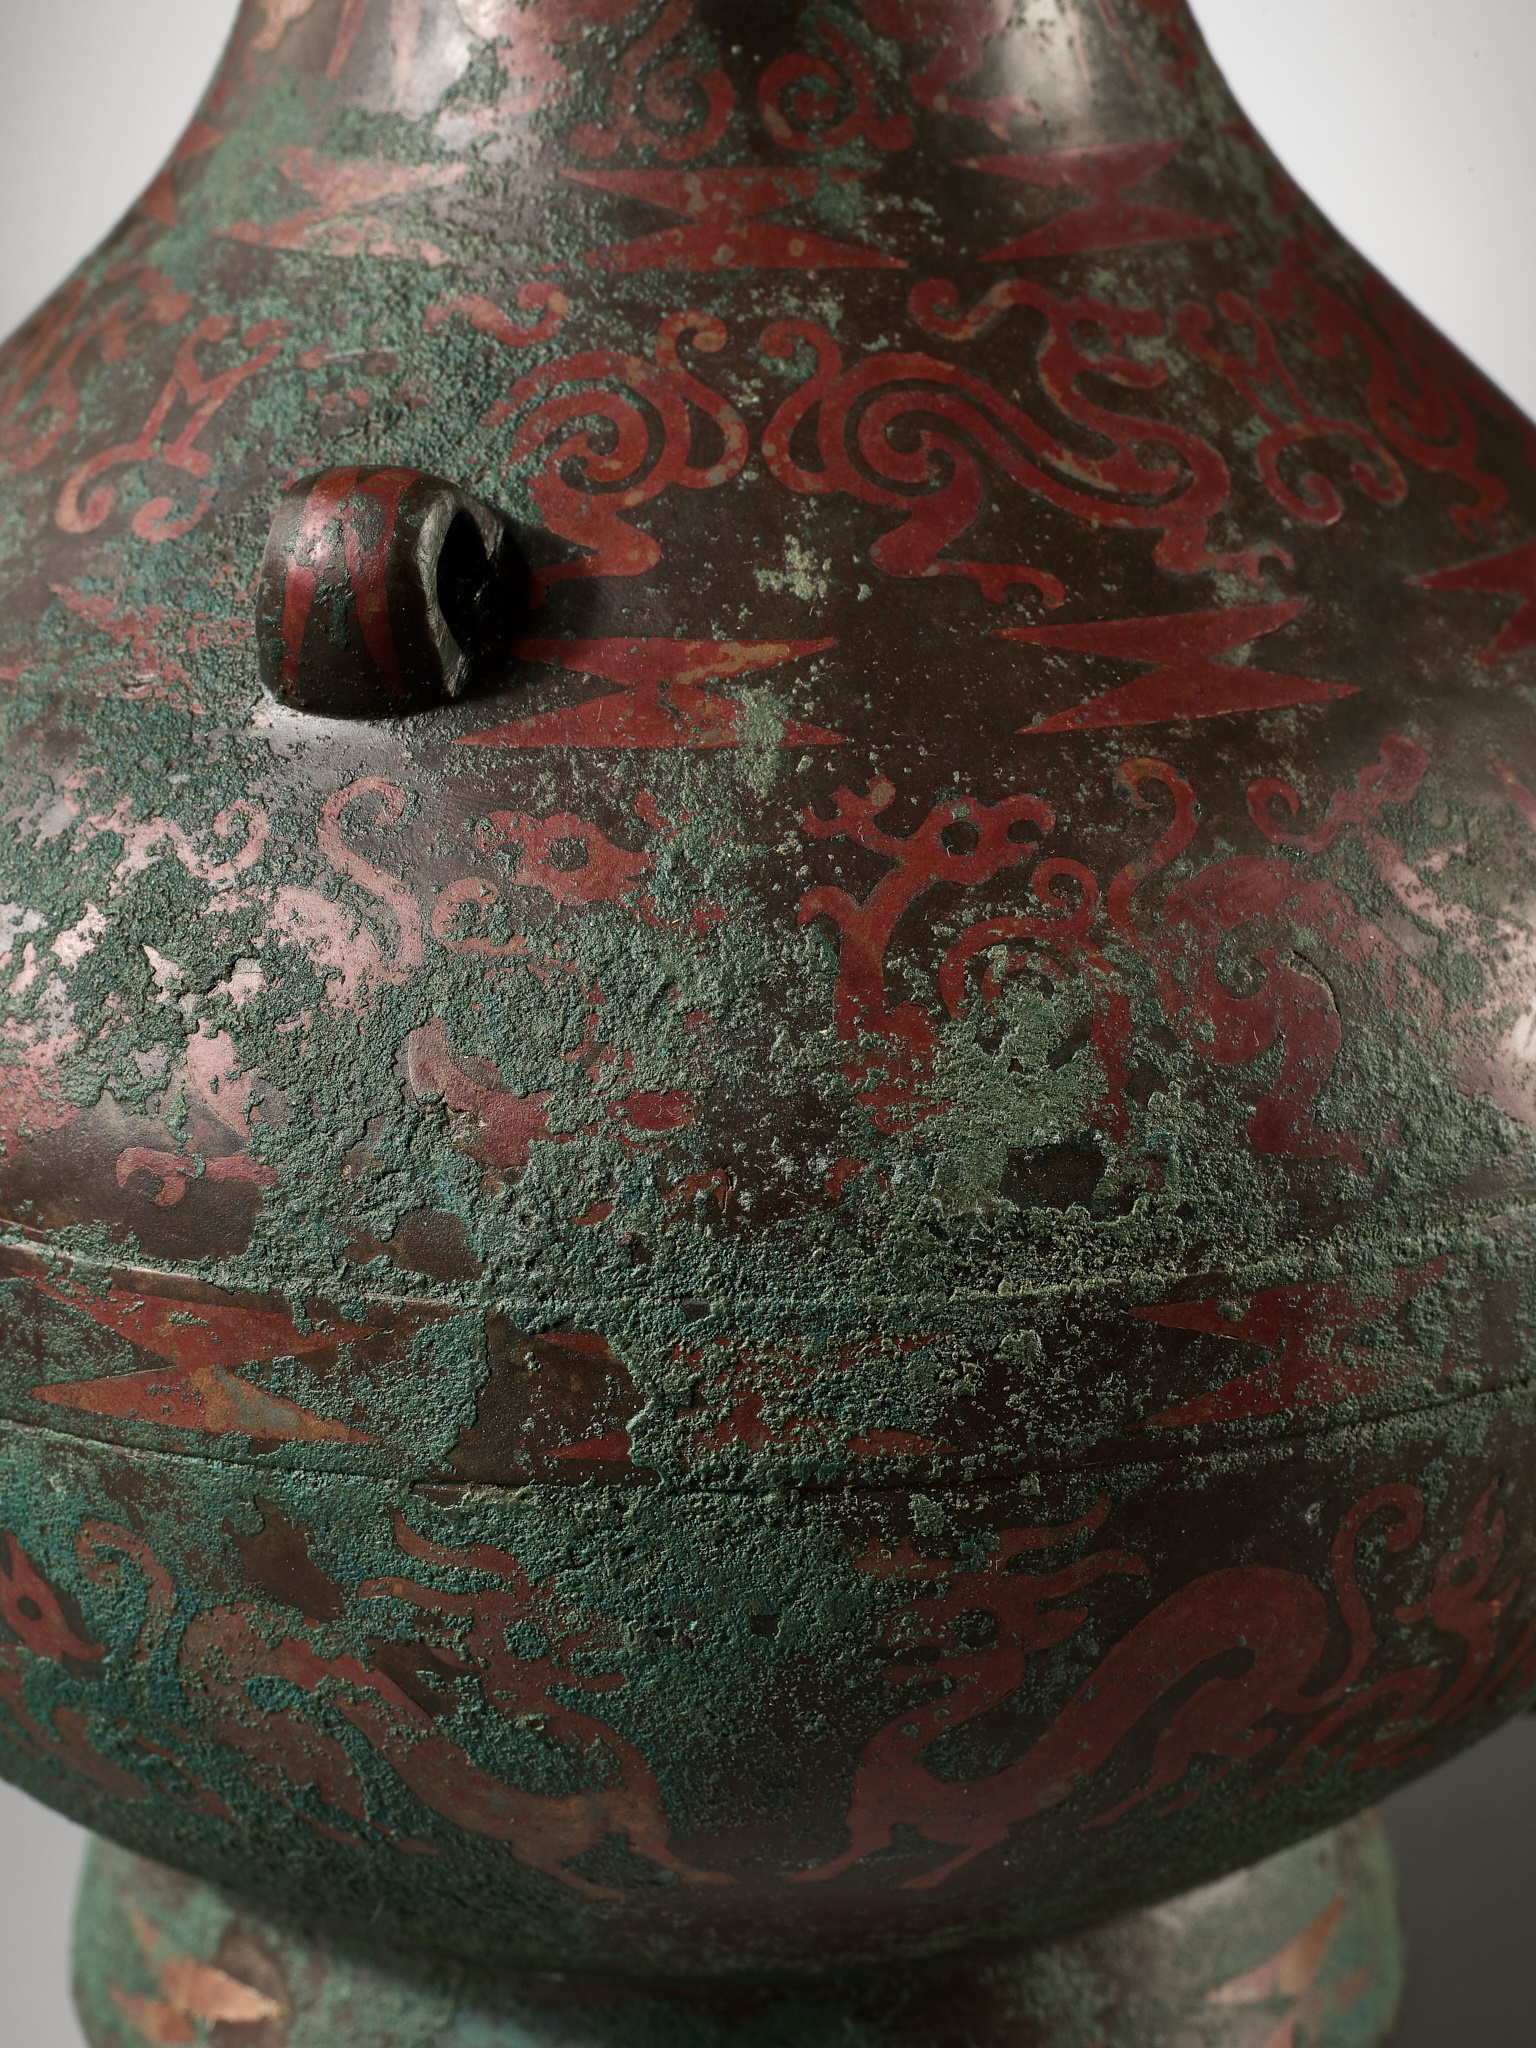 A COPPER-INLAID BRONZE RITUAL WINE VESSEL AND COVER, HU, EASTERN ZHOU DYNASTY - Image 19 of 27